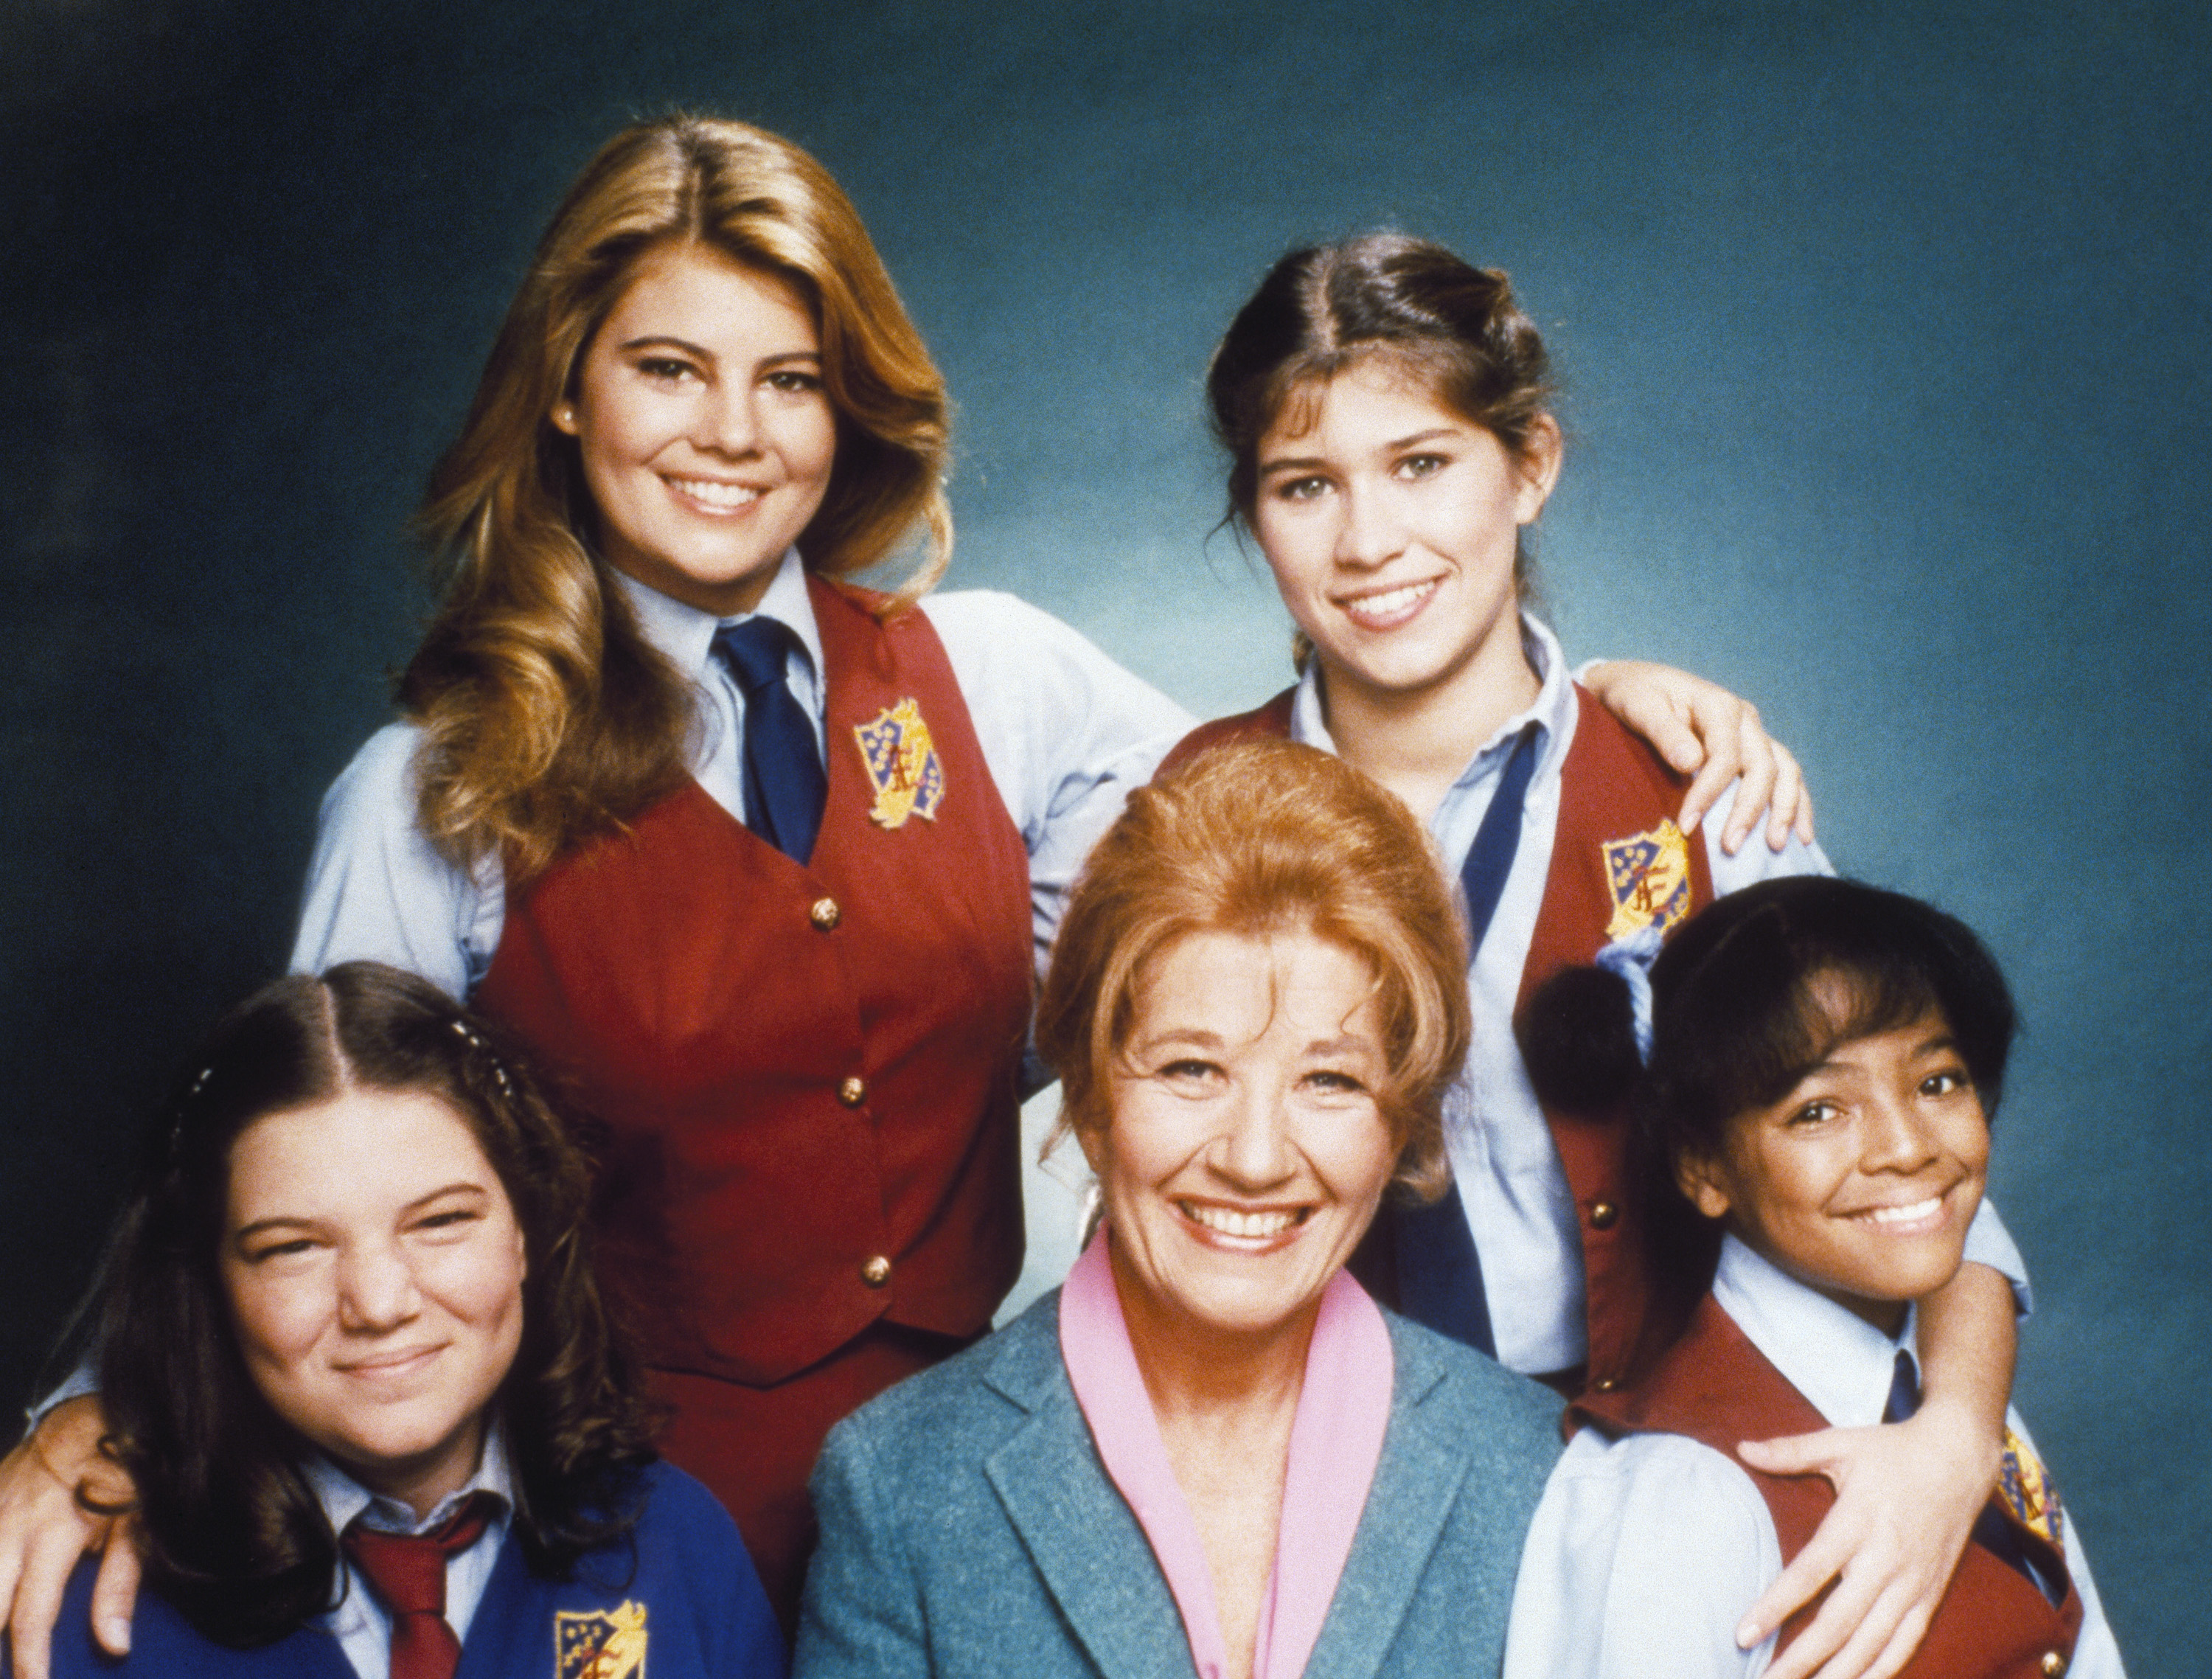 Lisa Whelchel and the rest of "The Facts of Life" cast in 1990 | Source: Getty Images